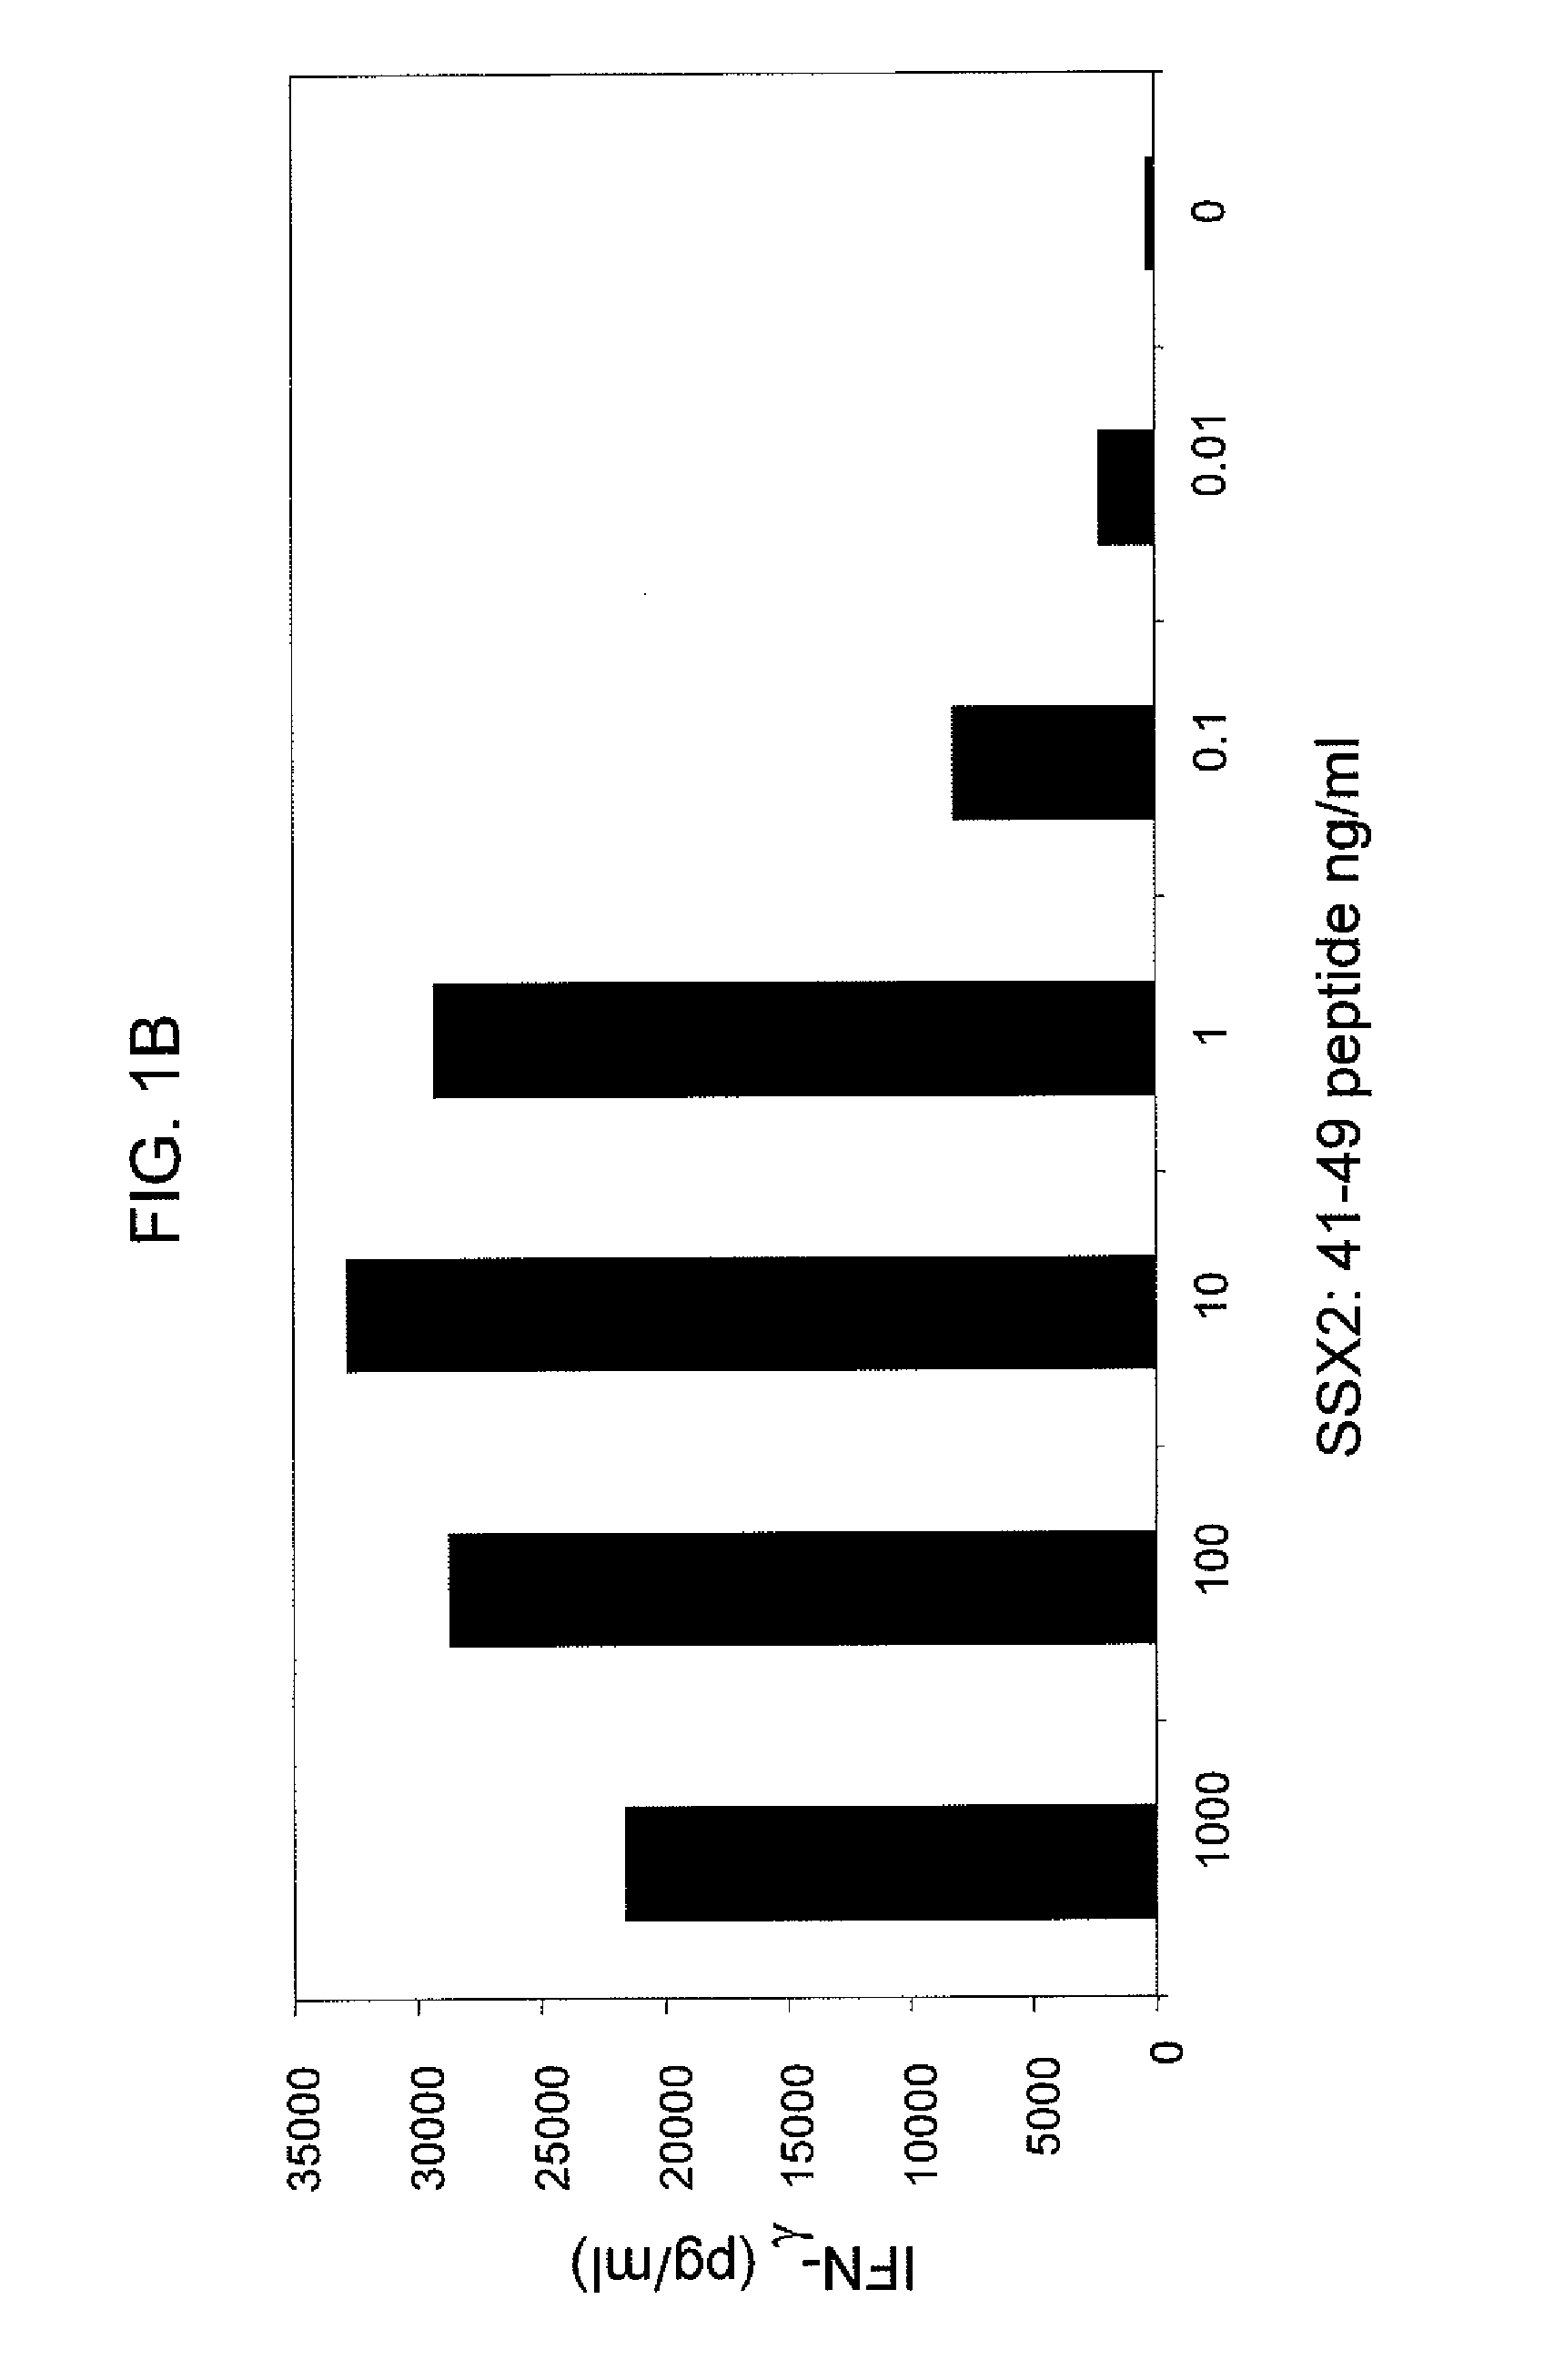 Anti-SSX-2 T cell receptors and related materials and methods of use